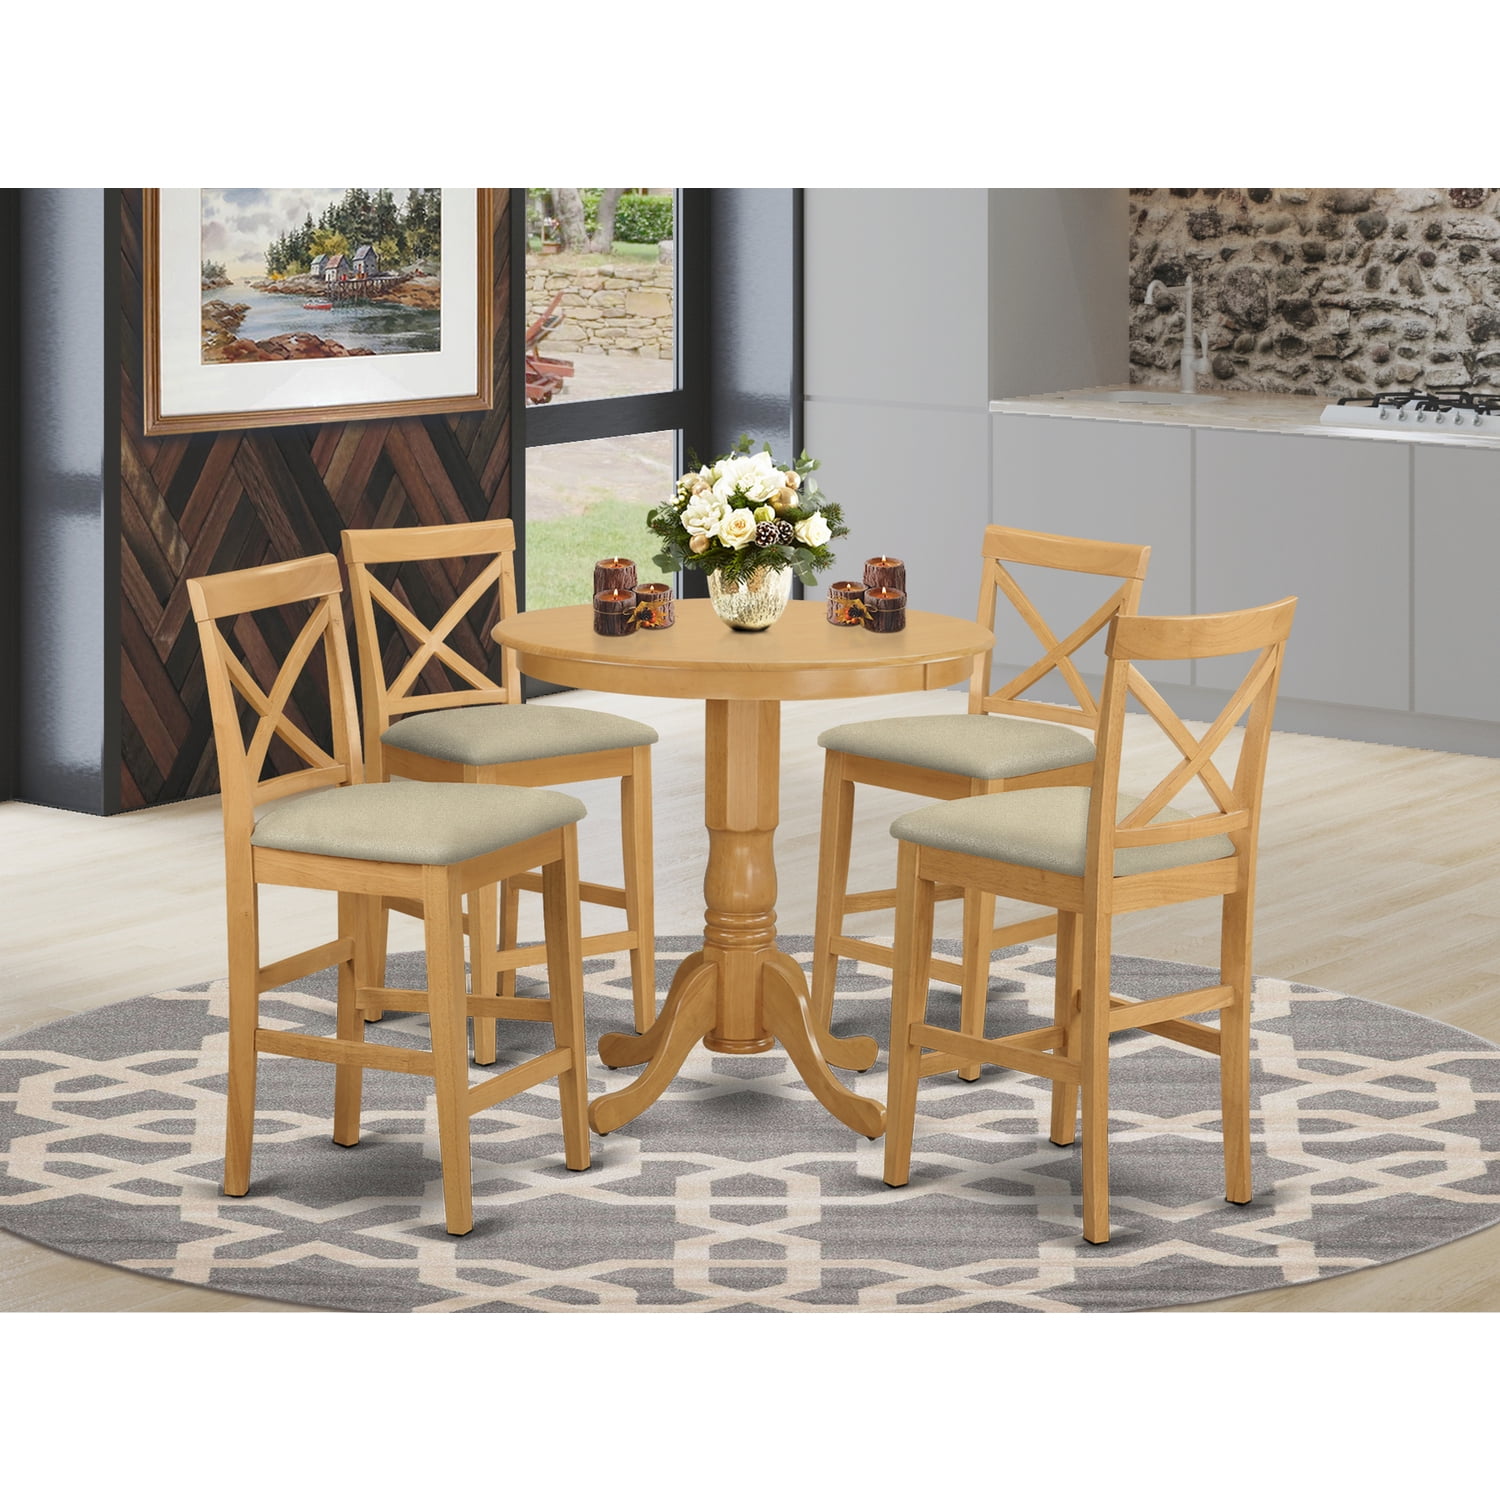 Counter Height Set Pub Table And Dining, Round High Kitchen Table And Chairs